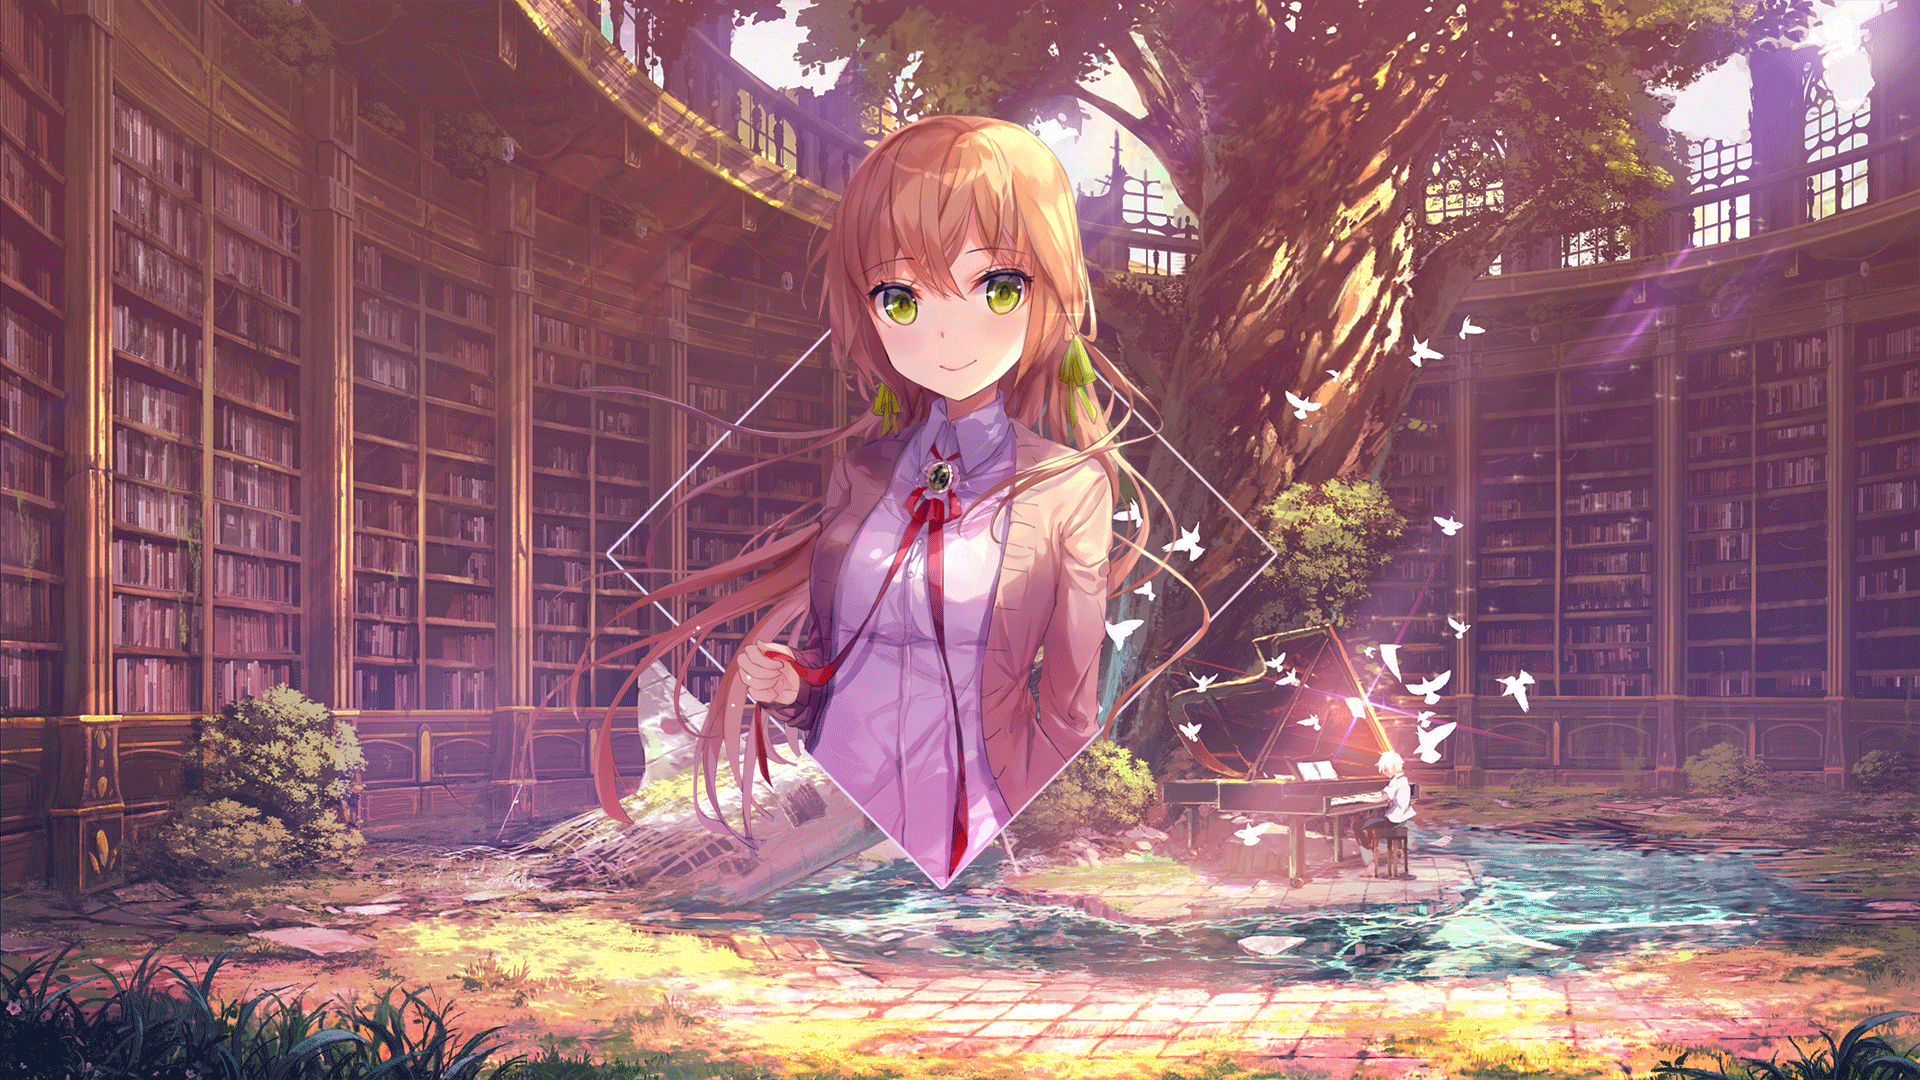 Anime 1920x1080 anime anime girls books trees piano digital art picture-in-picture blonde green eyes smiling